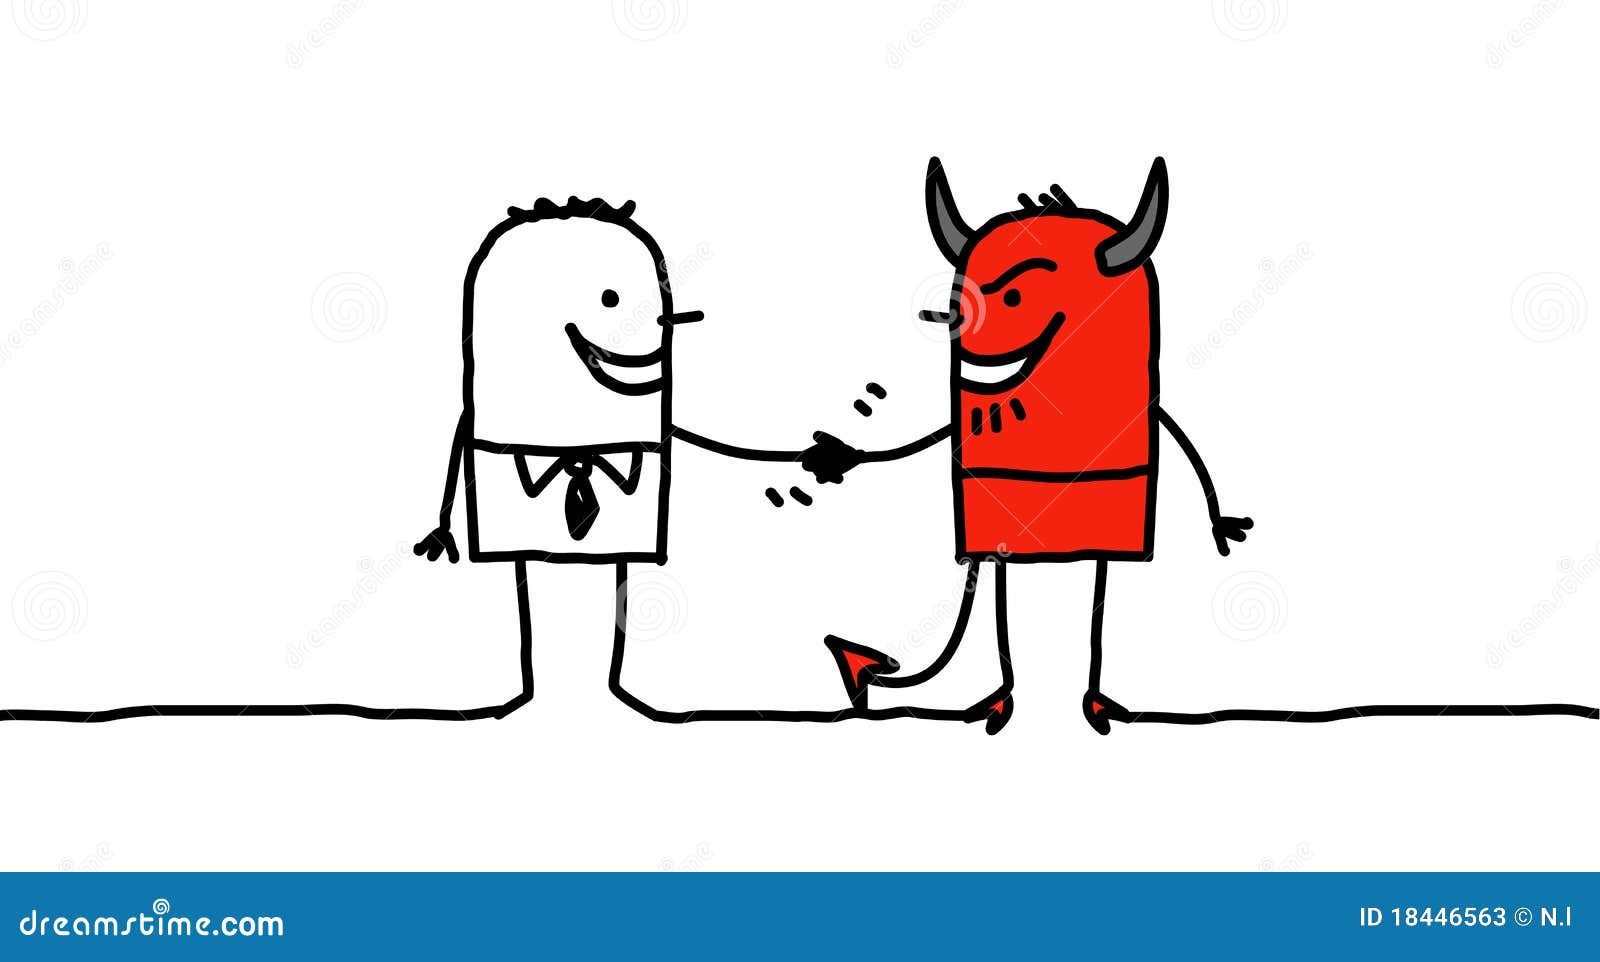 man making a pact with the devil